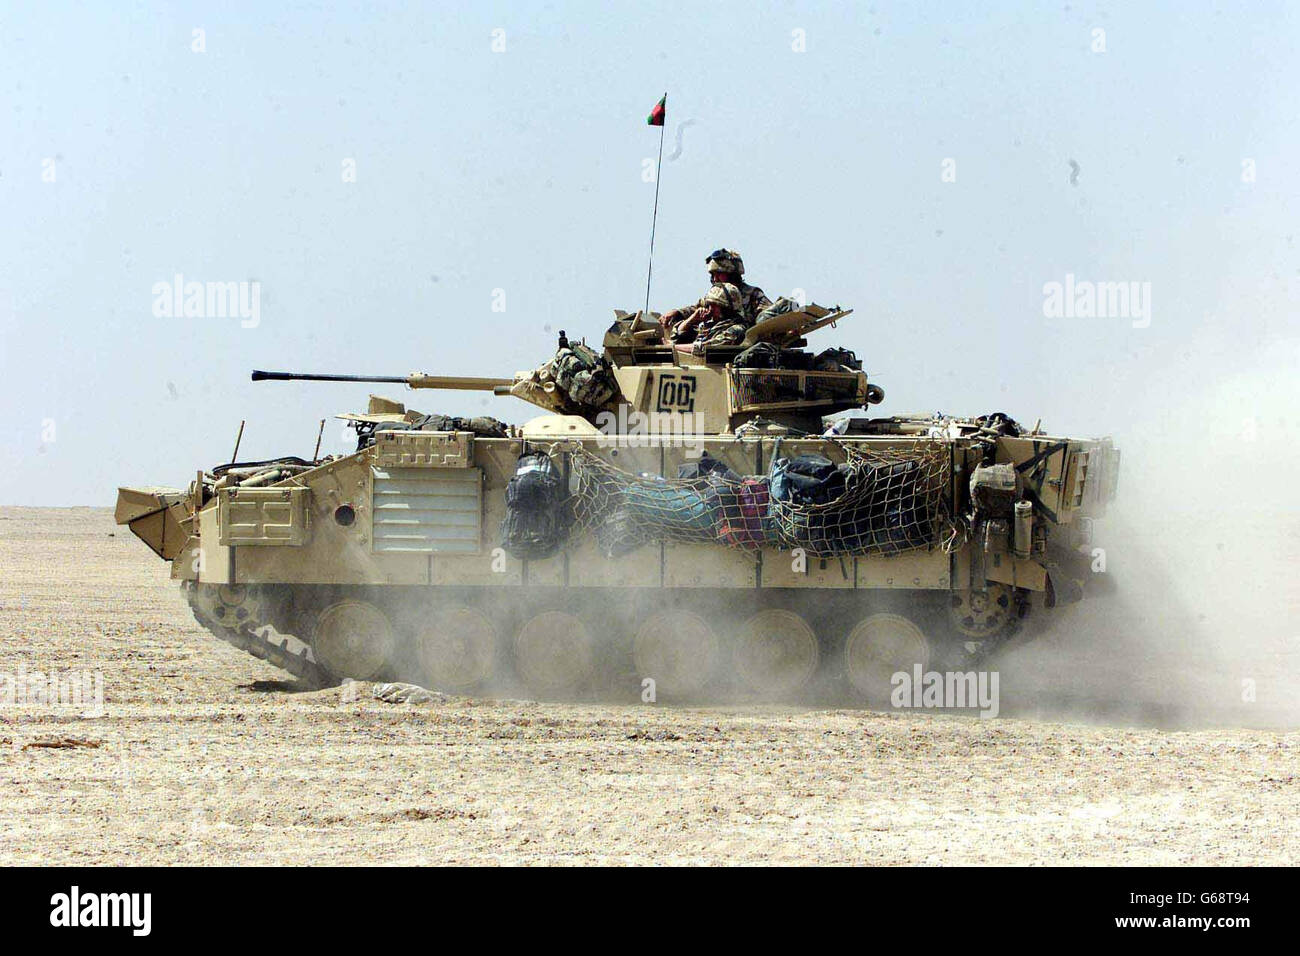 Royal Fusiliers in Kuwait desert. Picture made available 27/03/03 of members of the Royal Regiment of Fusiliers in the Kuwaiti Desert. Stock Photo